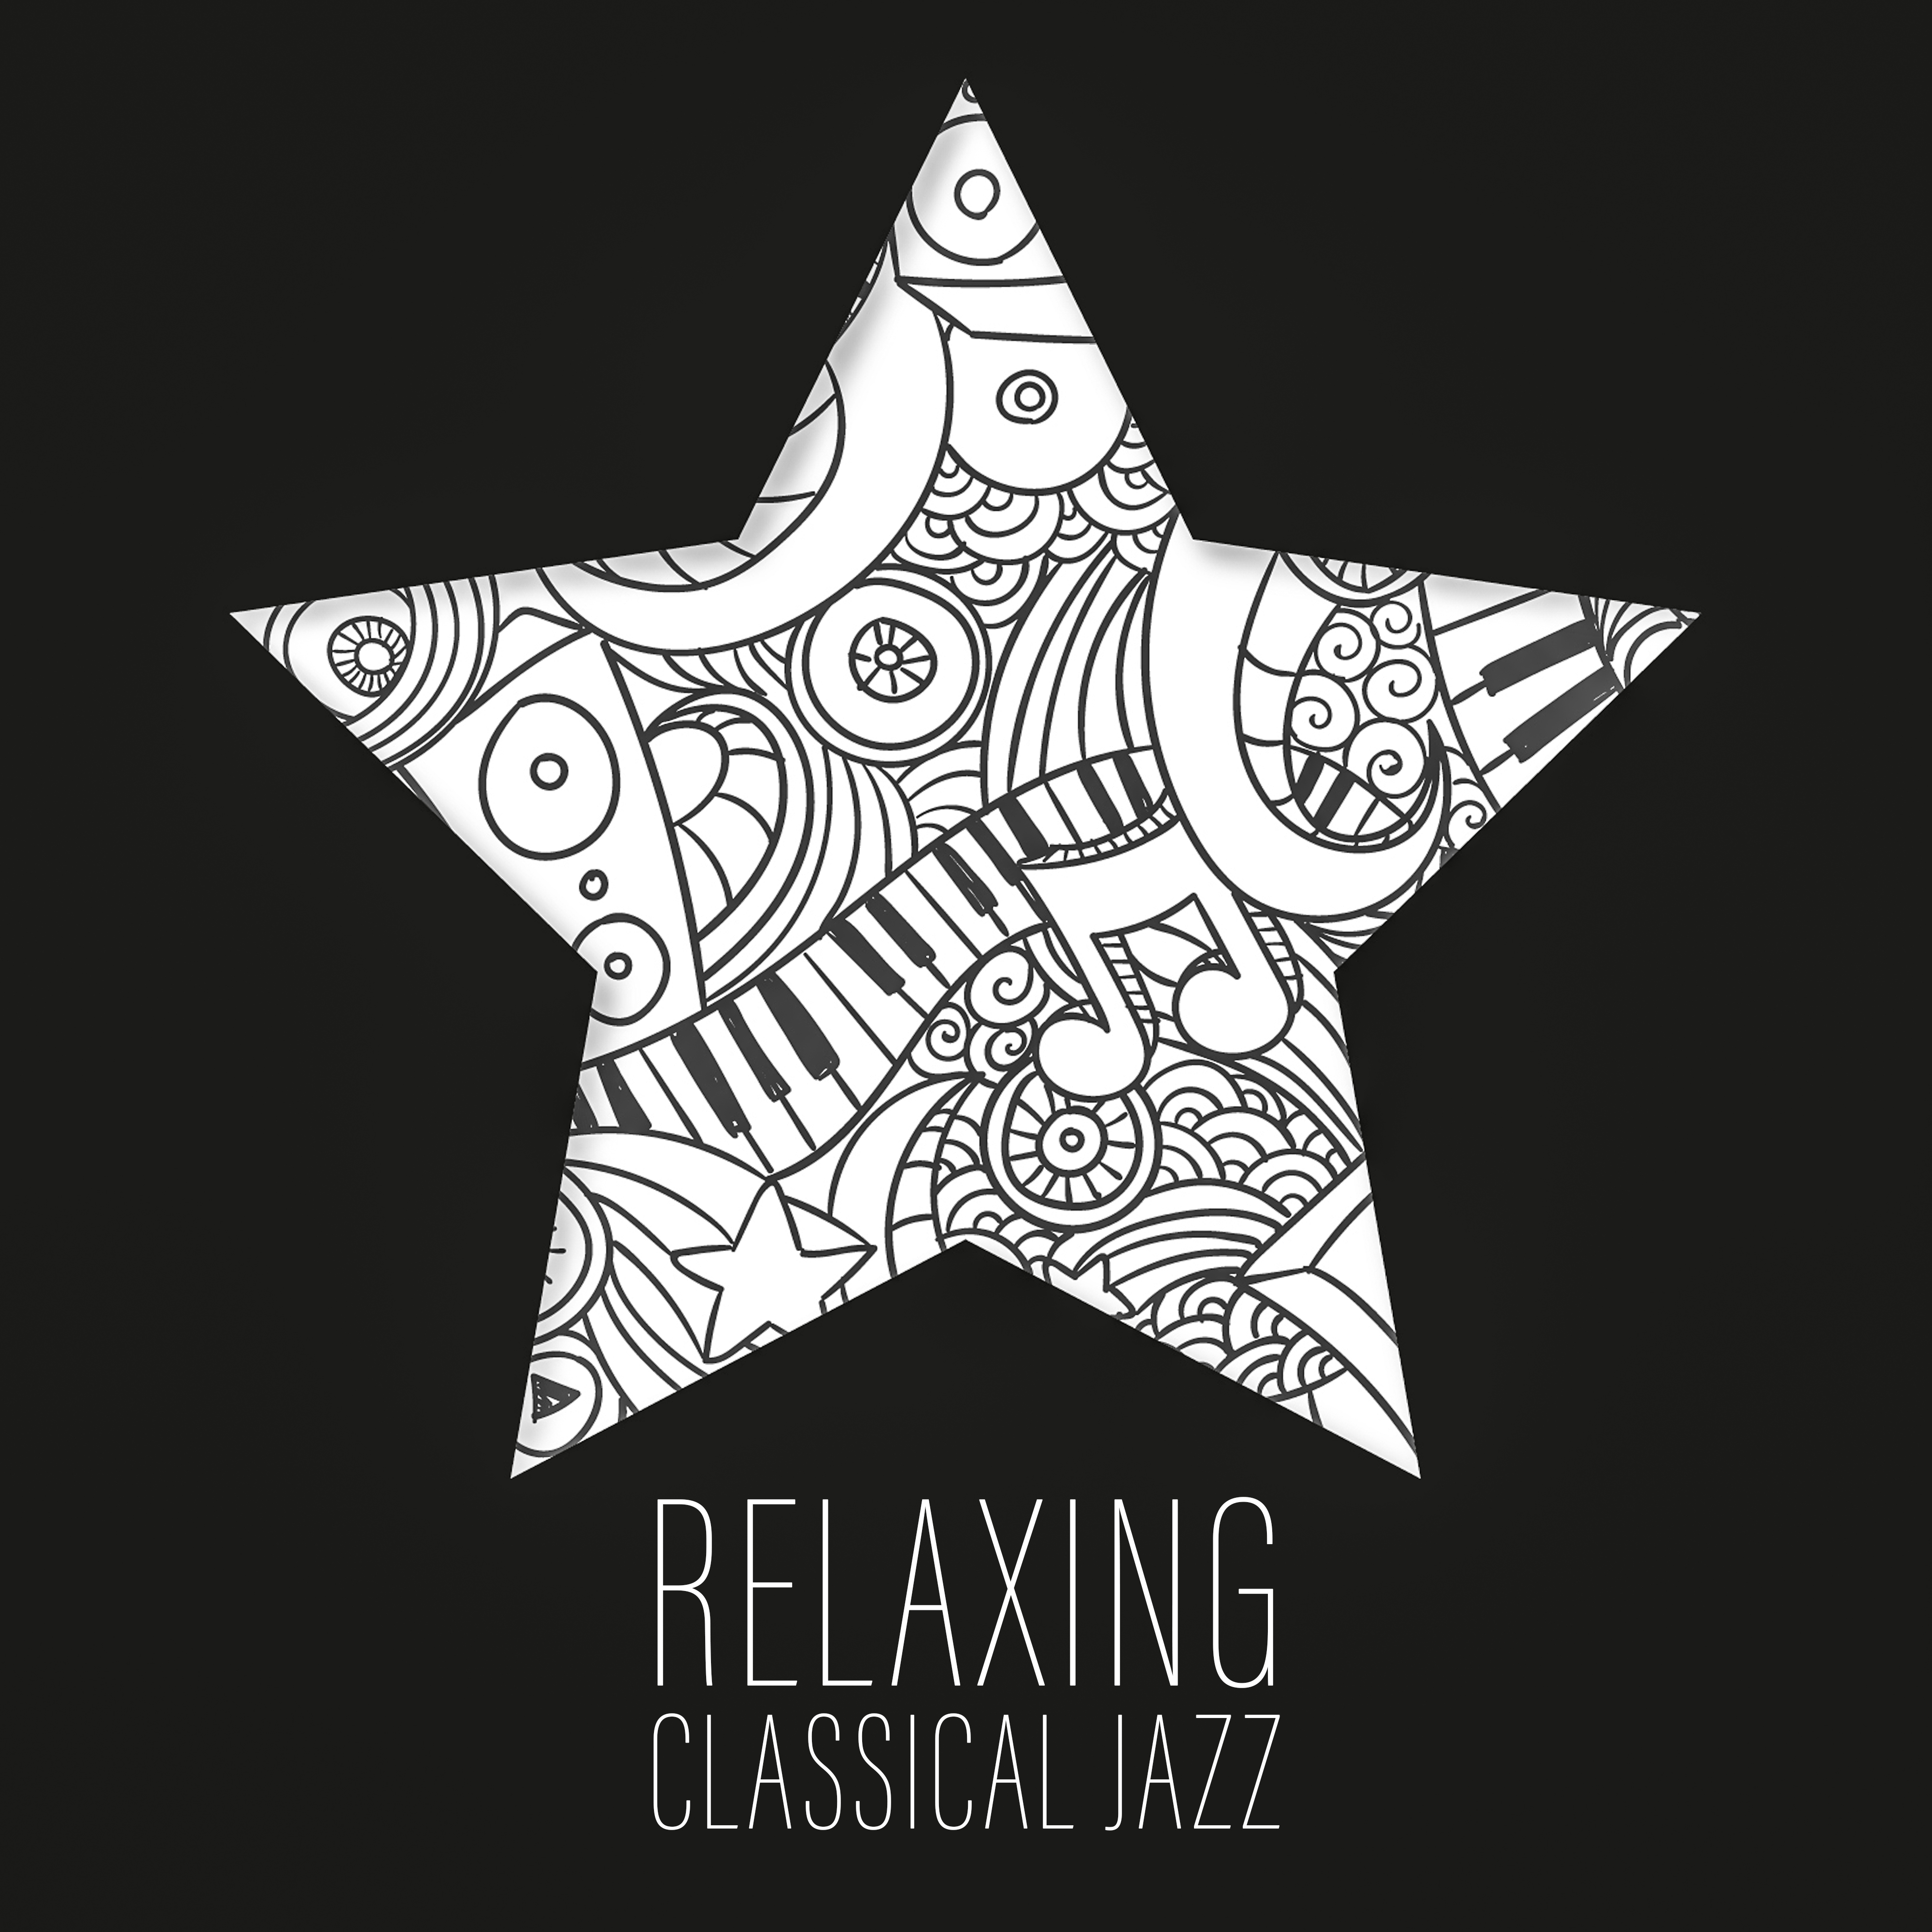 Relaxing Classical Jazz